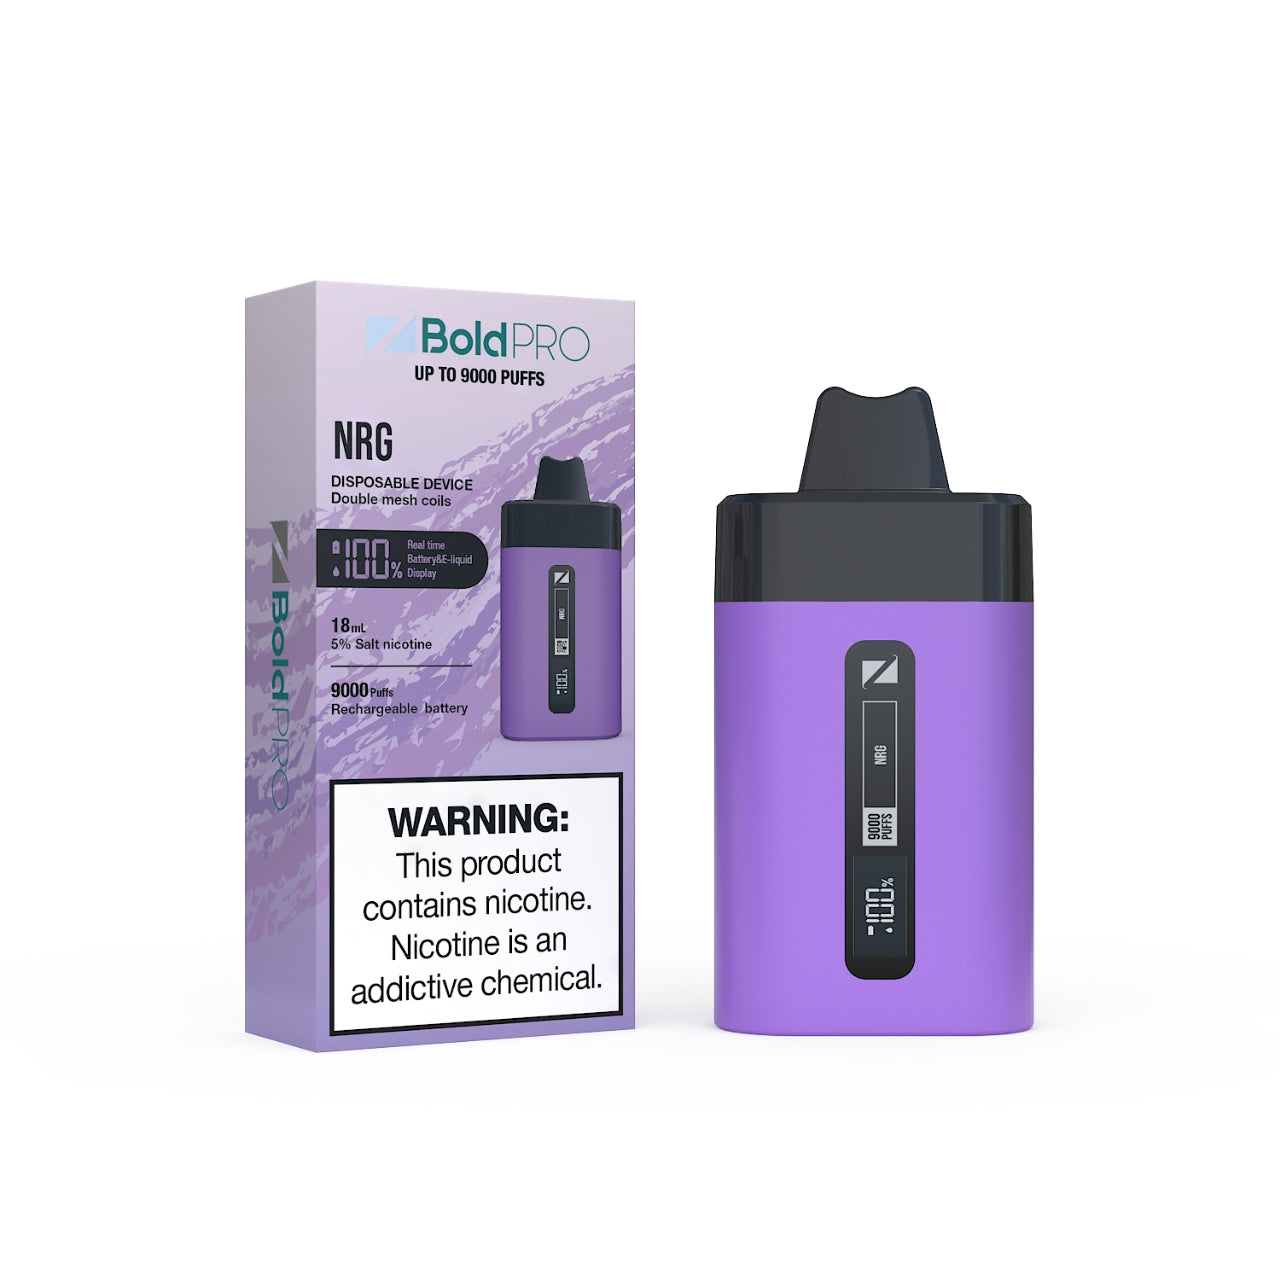 Z Bold Pro - NRG - 9000 Puffs - LED Screen with Juice and Battery Indicator